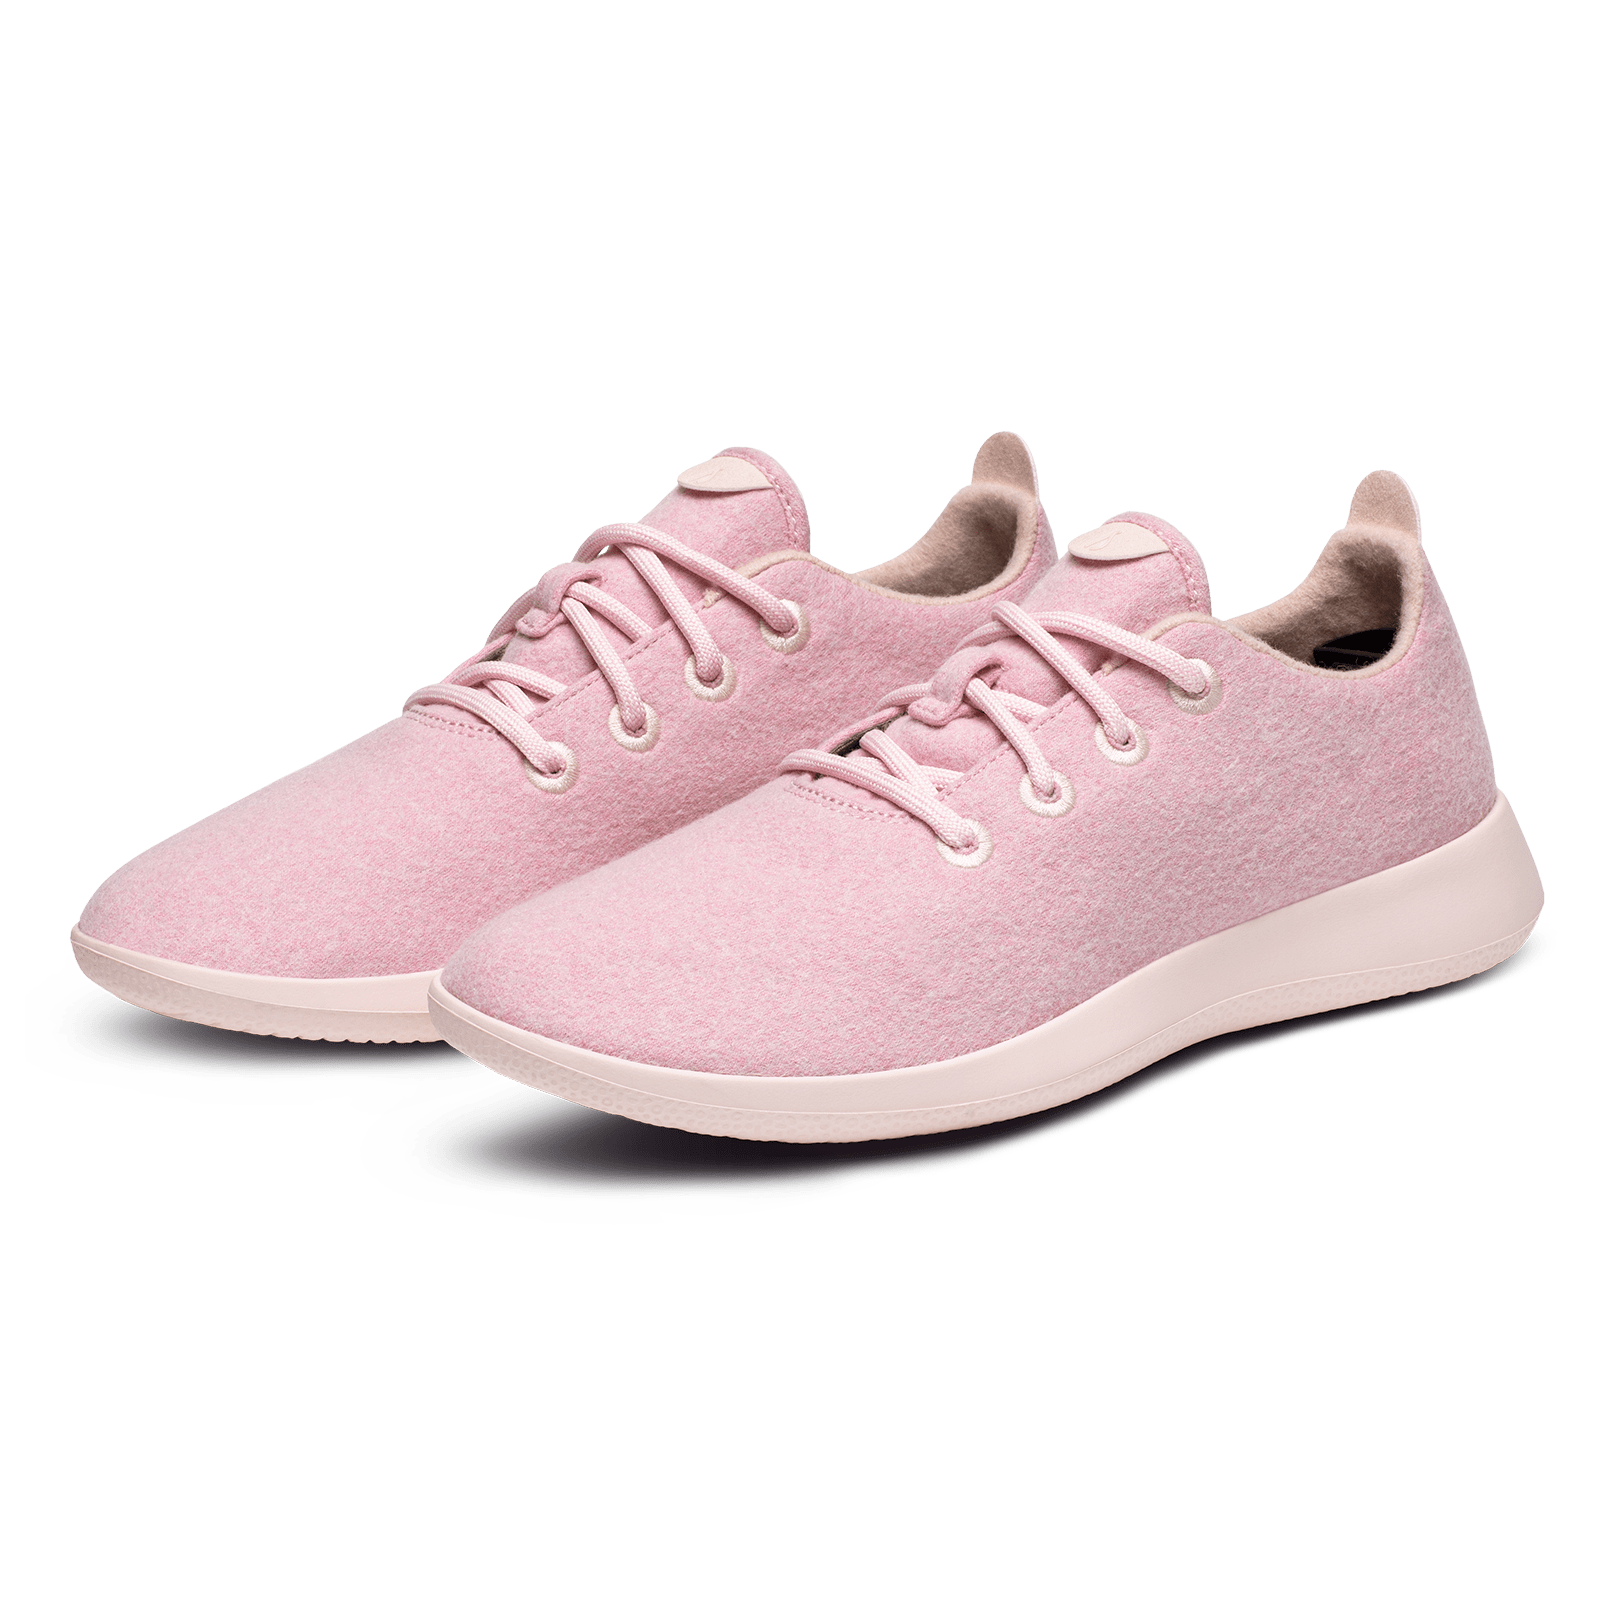 Women's Wool Runners - Calm Taupe (Calm Taupe Sole)